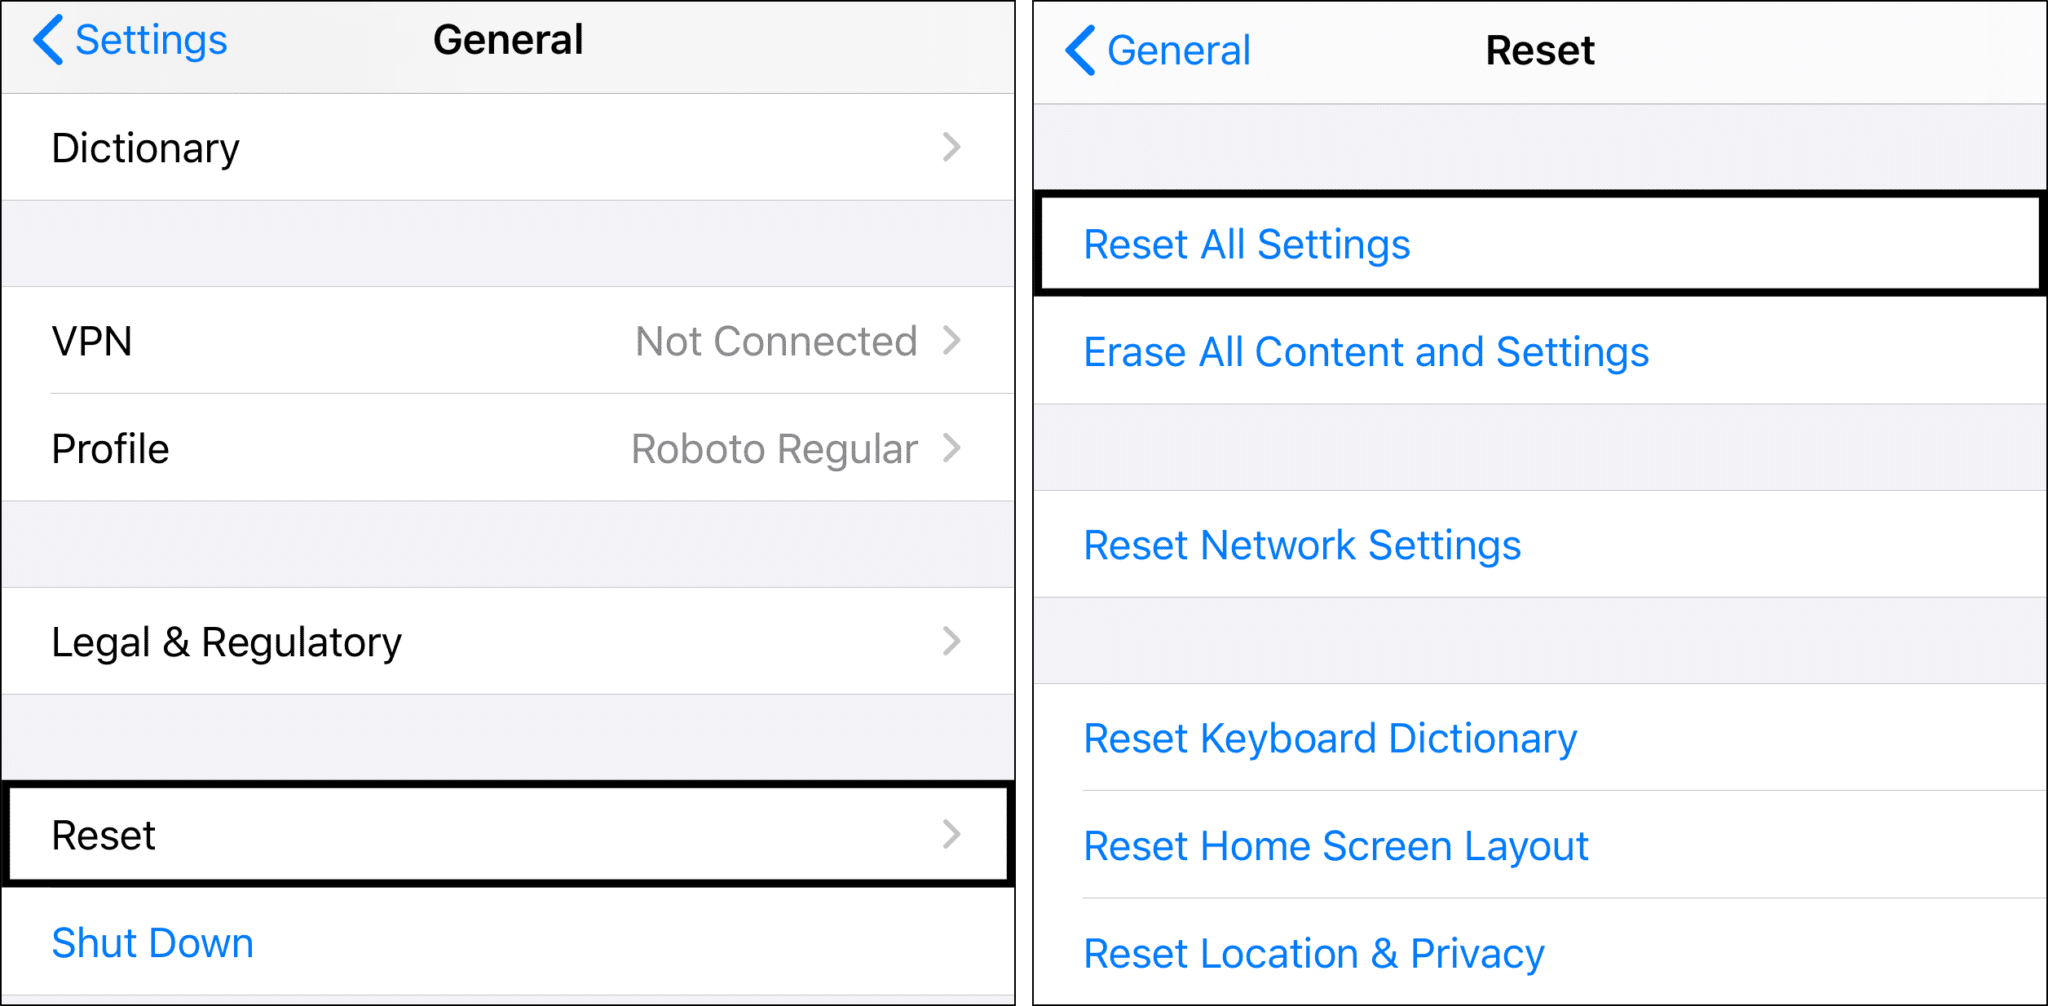 Reset the device on iPhone to Fix Google Home "Can’t Send Invite Right Now" Error